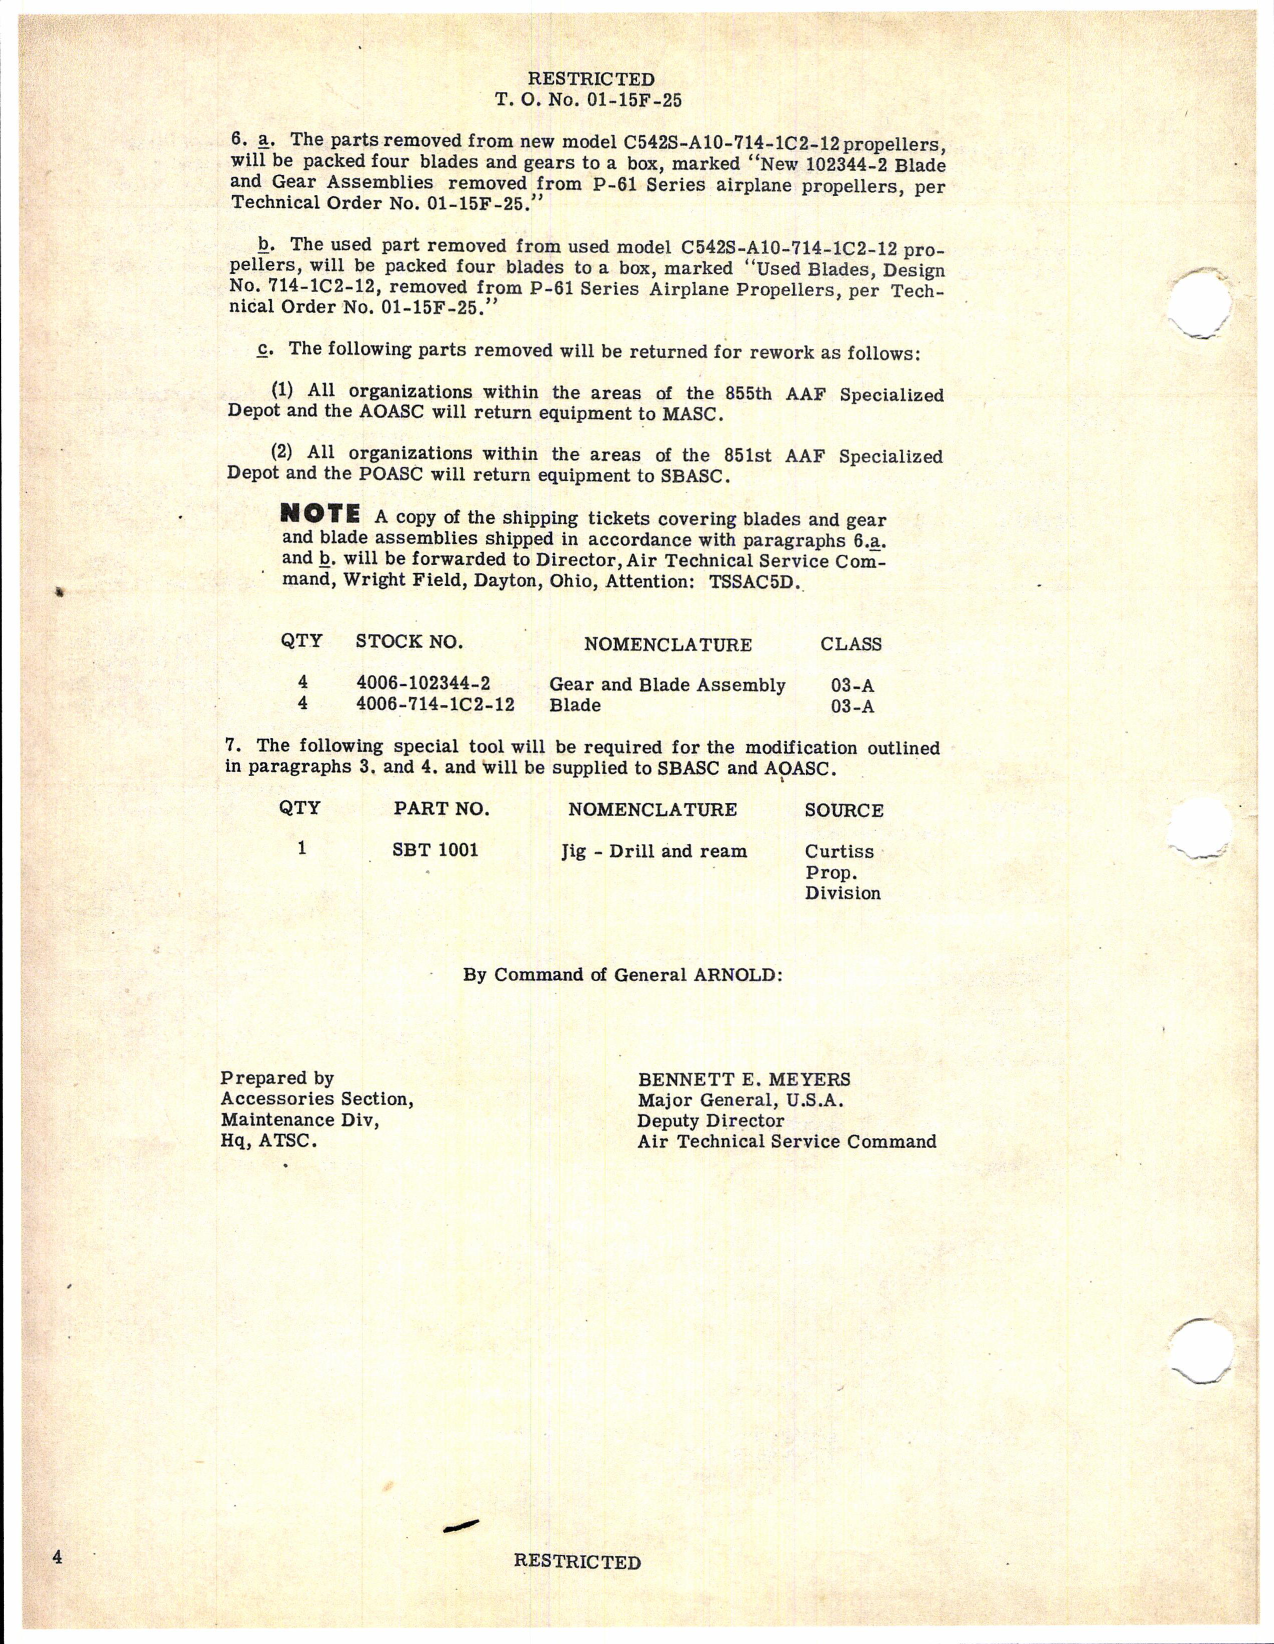 Sample page 4 from AirCorps Library document: Modification of Curtiss Electric Propeller P-61 Series